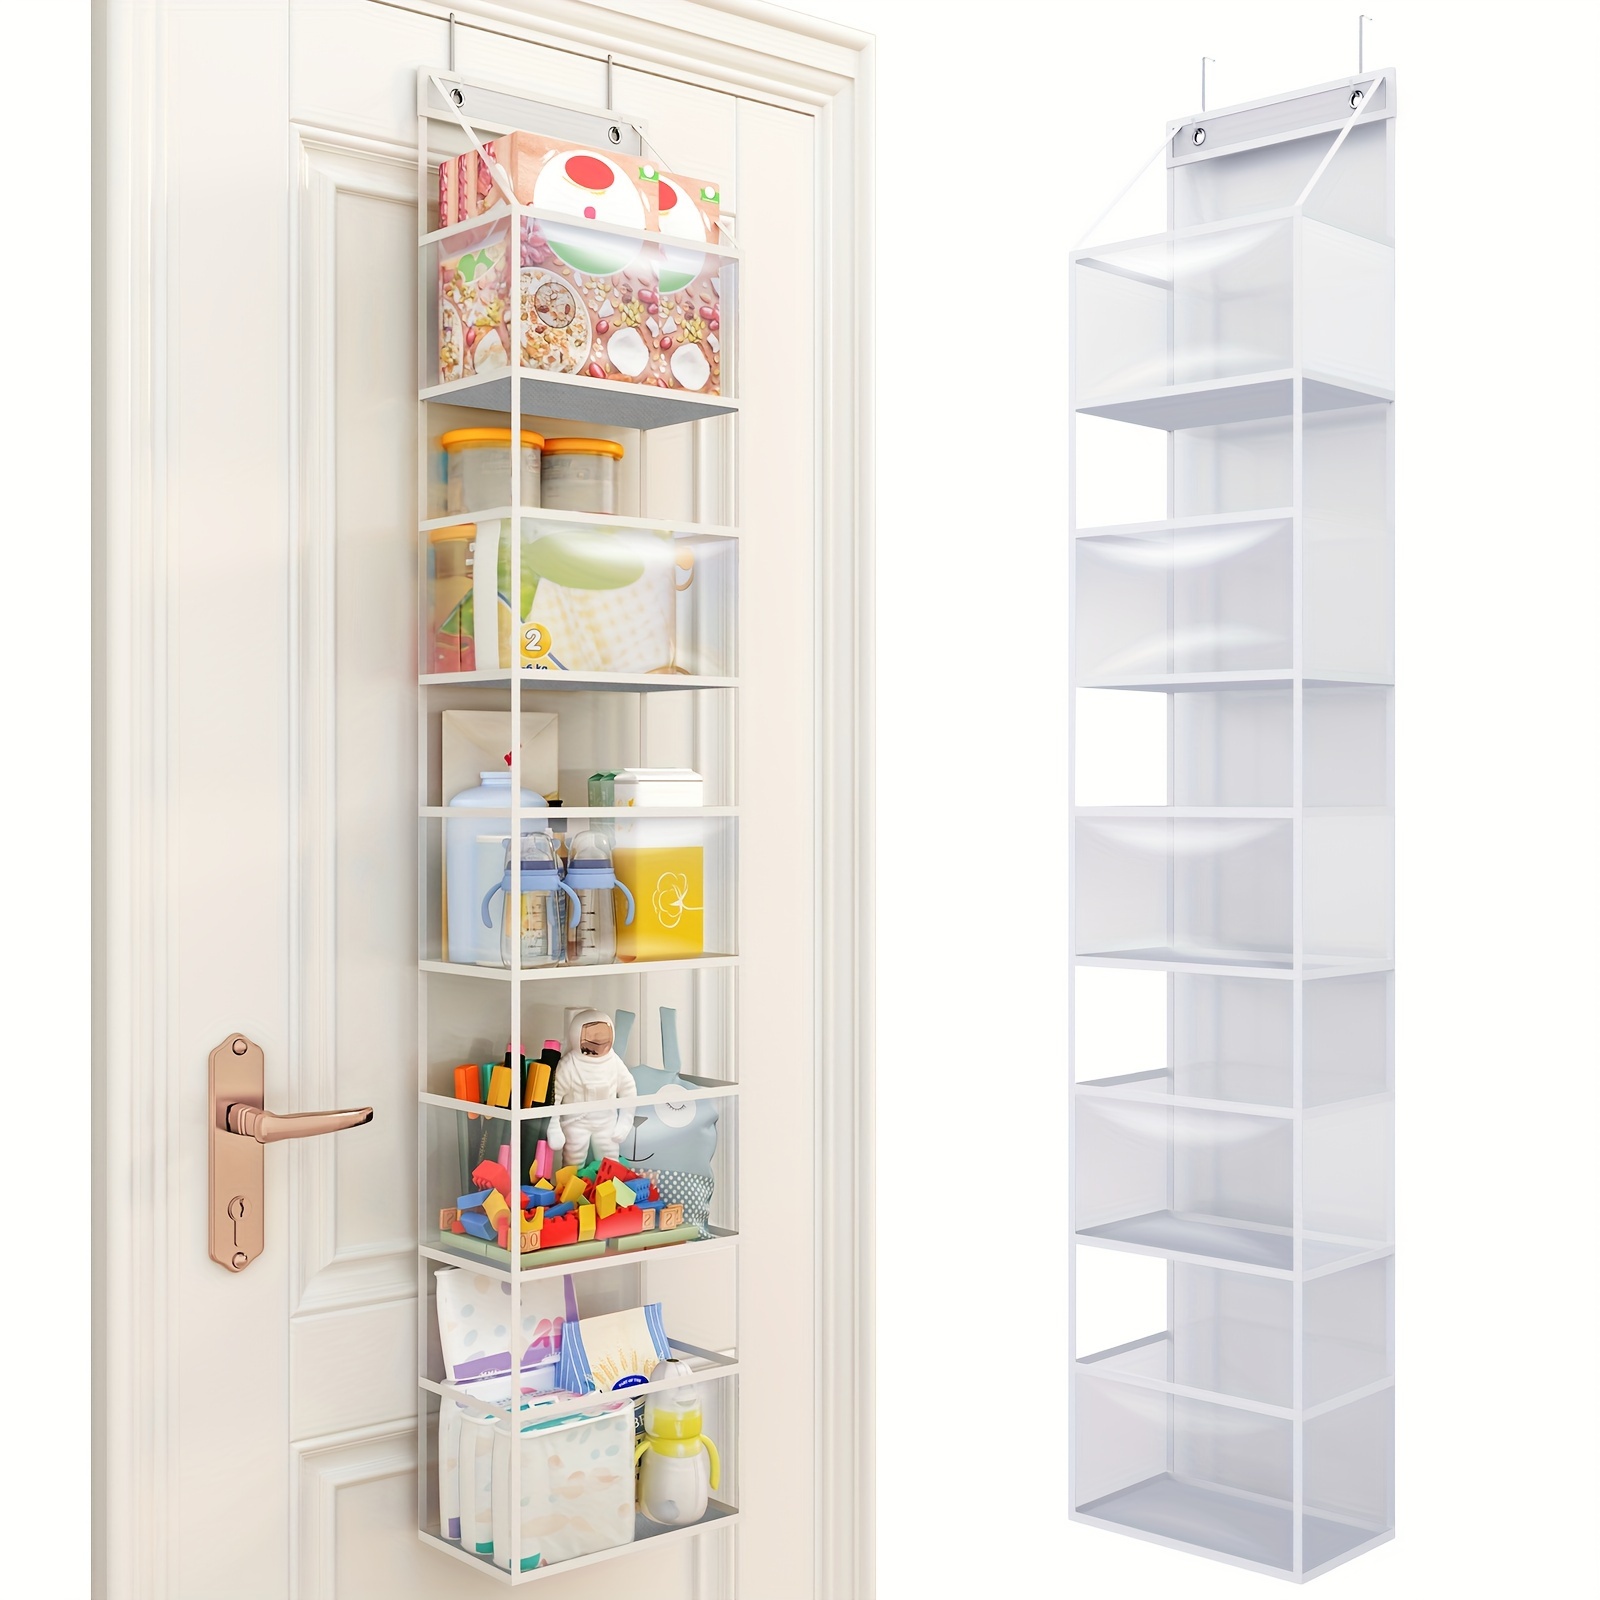 

1pcs 5-shelf Over The Door Hanging Pantry Organizer, Hanging Storage With Clear Plastic Pockets, Large Capacity Door Organizer For Closet, Bedroom, Living Room, Bathroom And Sundries